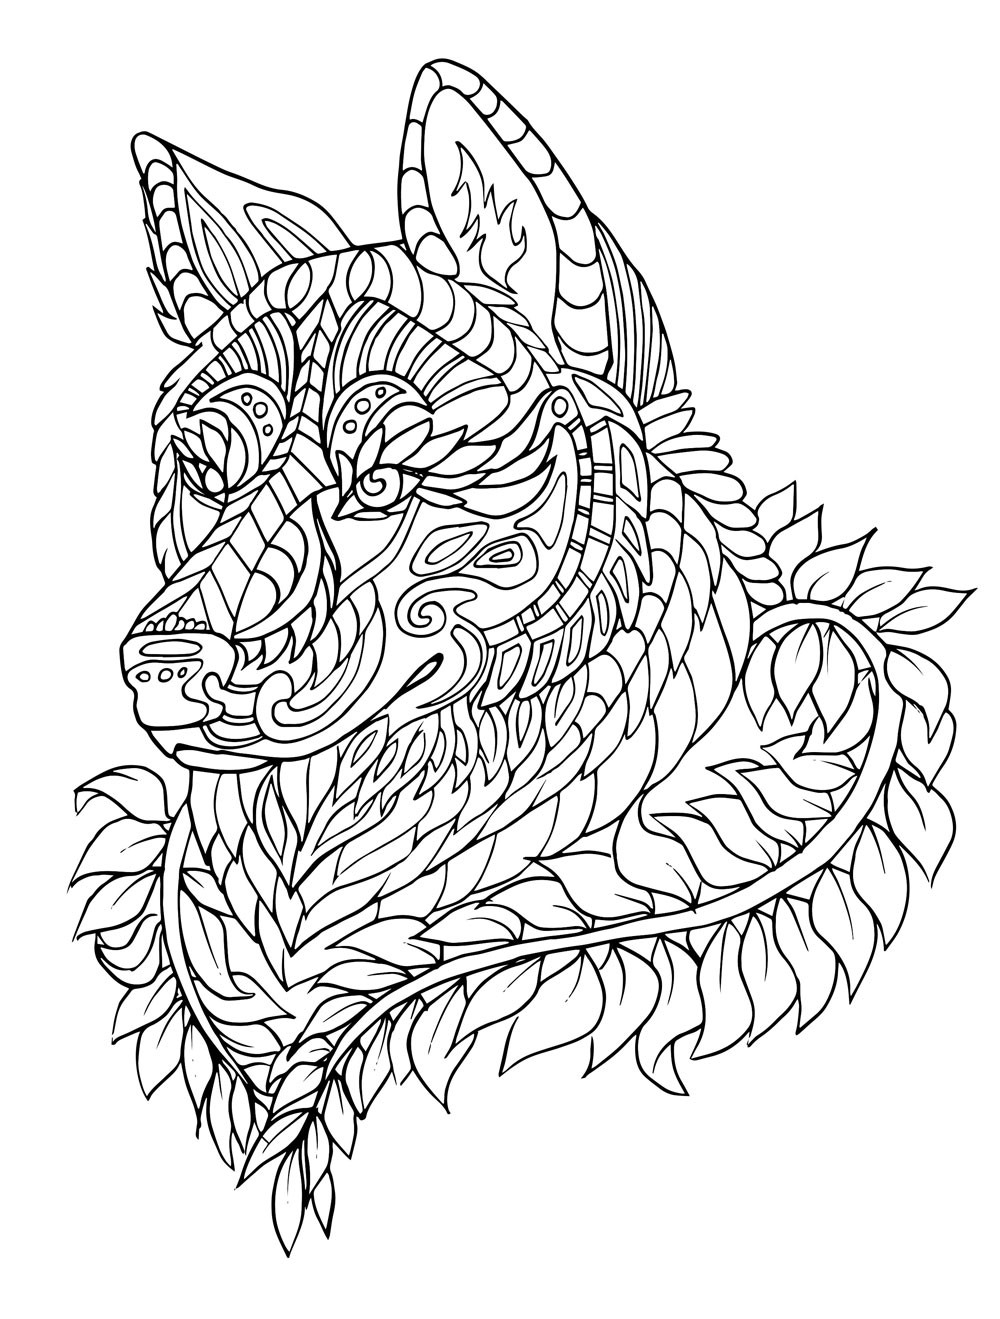 Coloring Pages Of A Wolf Coloring Ideas Surpriselt Coloring Pages Of Wolves Hard Wolf And